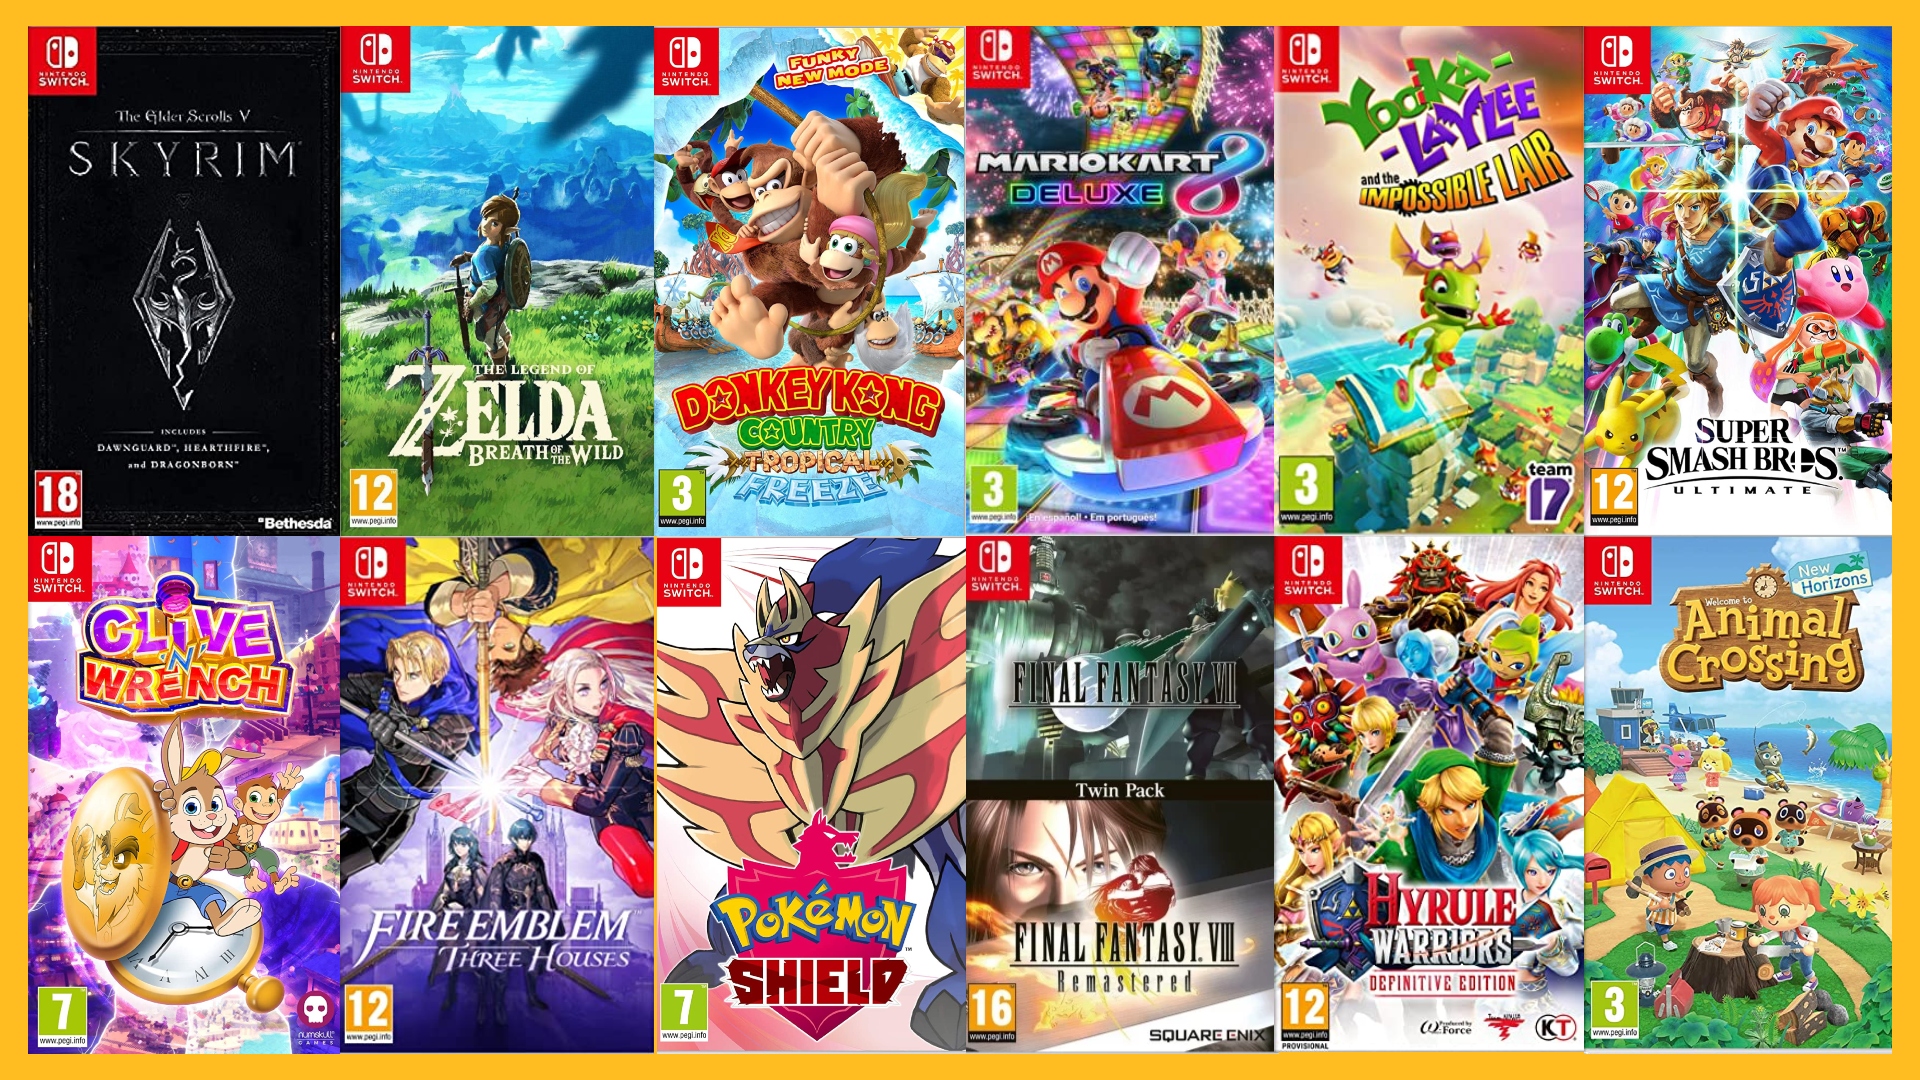 Nintendo Switch review image show a vast selection of games on the system, including Skyrim, Breath of the Wild, Mario Kart 8 Deluxe, Fire Emblem: Three Houses, and many others.